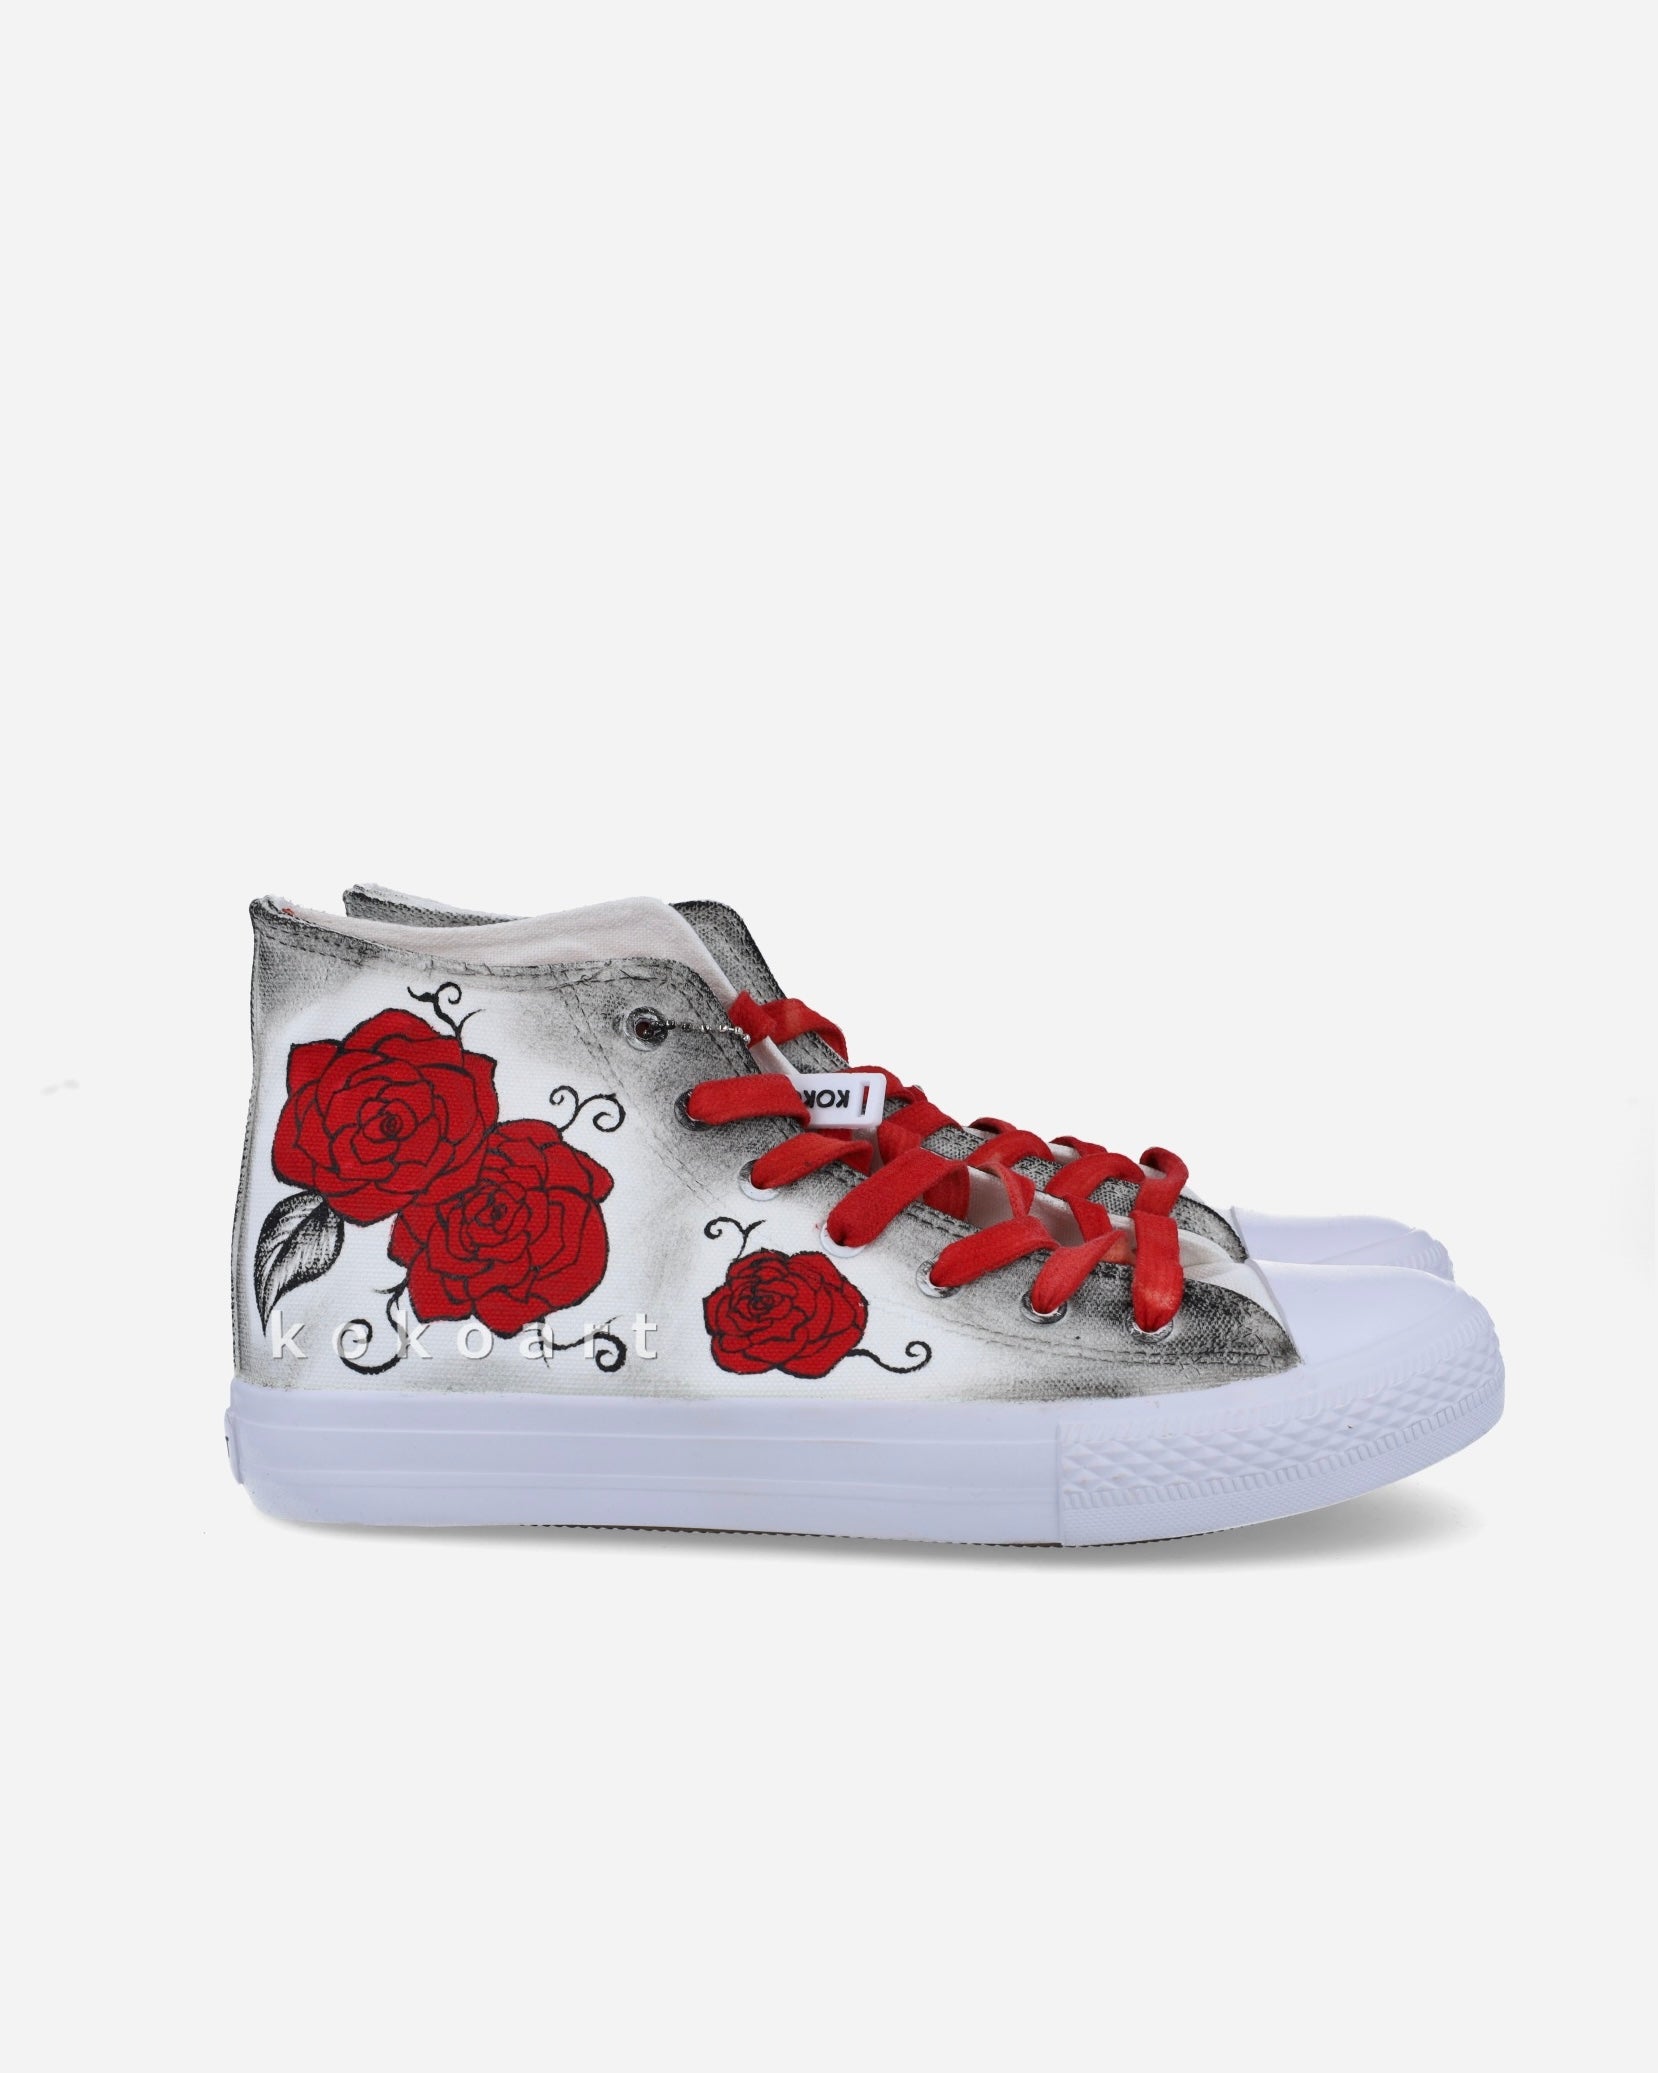 Feather & Red Roses Hand Painted Shoes